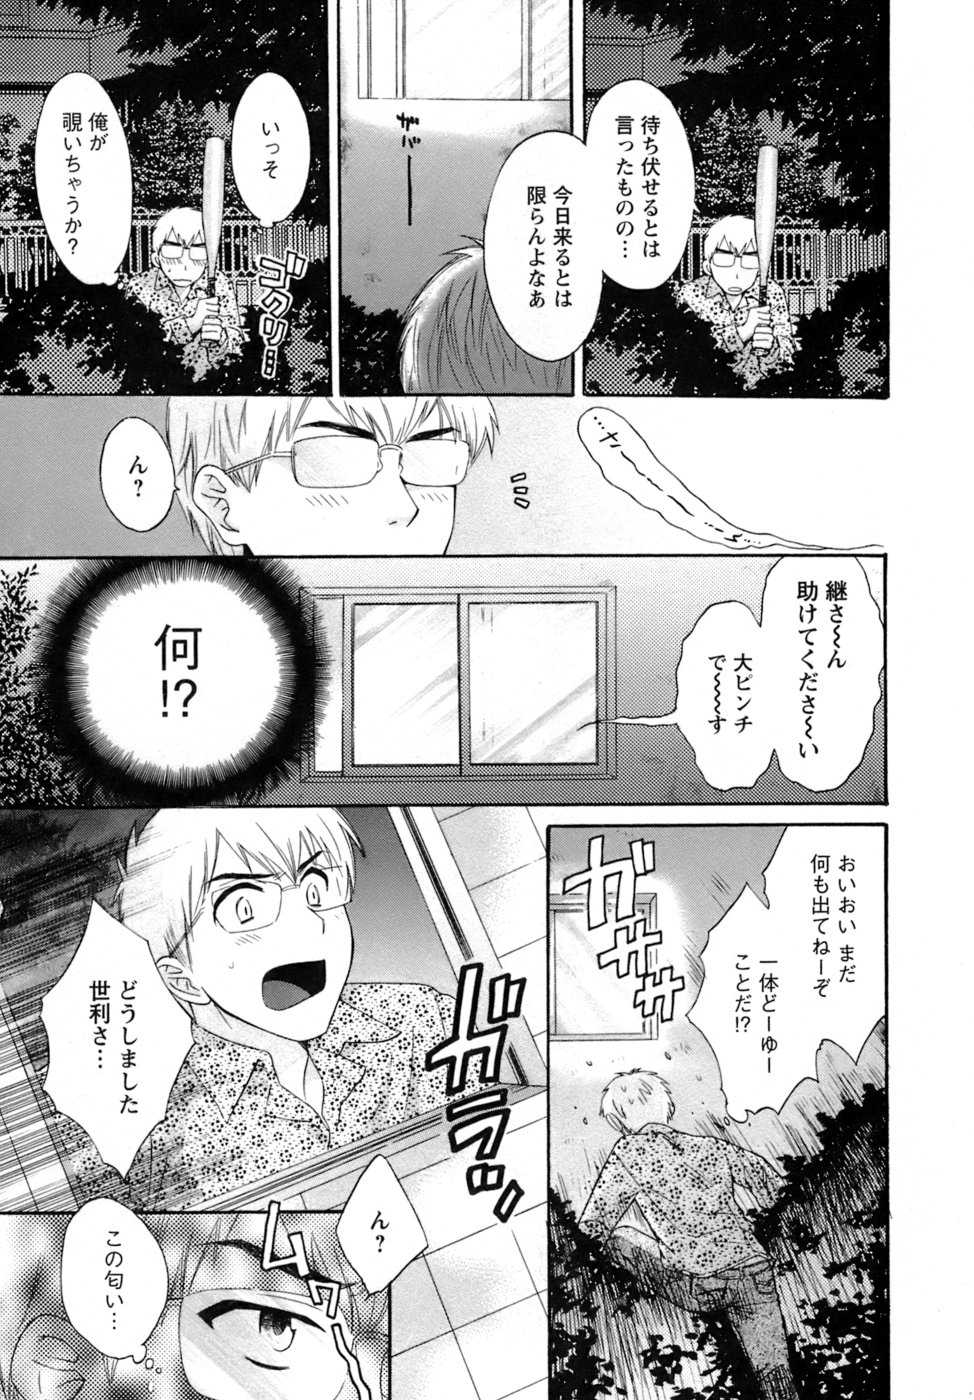 [Pon Takahanada] A Hundred of the Way of 100 Living with Her [ポン貴花田] 家政婦(かのじょ)と暮らす100の方法